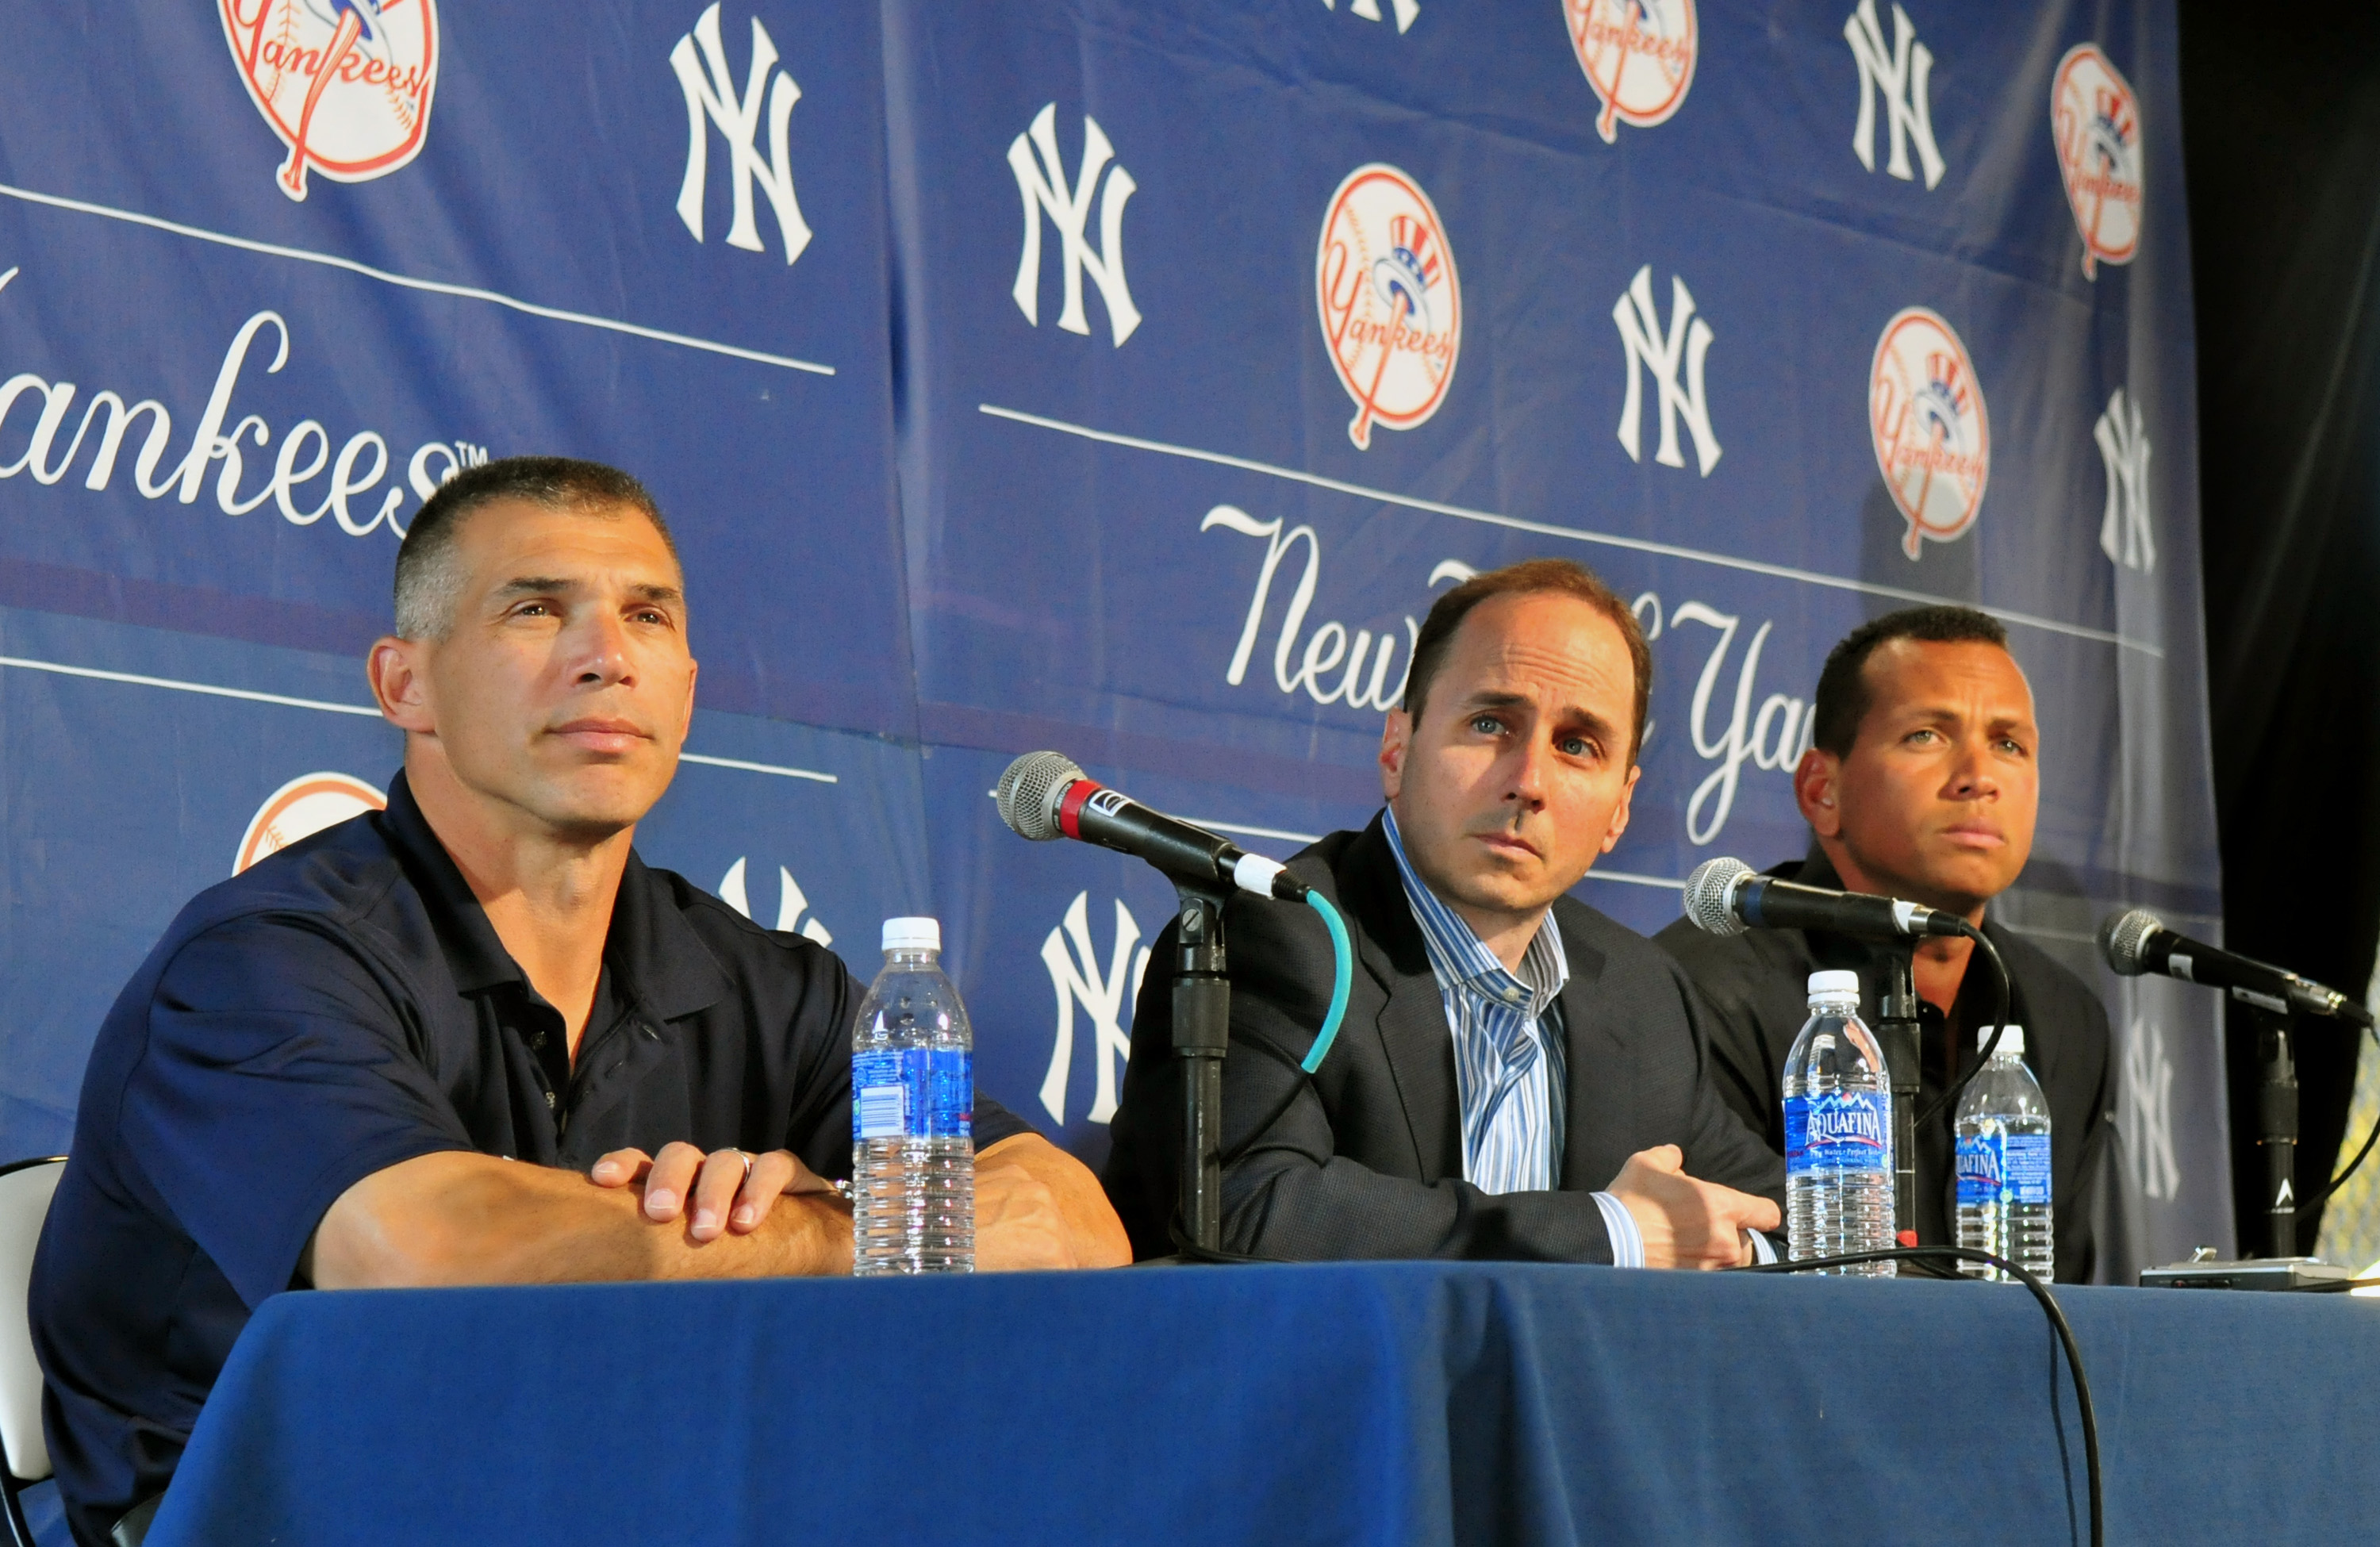 TAMPA - FEBRUARY 17: Infielder Alex Rodriguez of the New York Yankees talks during a press conference as manager Joe Girardi (L) and General Manager Brian Cashman (C) listen February 17, 2008 at the George M. Steinbrenner Field in Tampa, Florida. The Yank